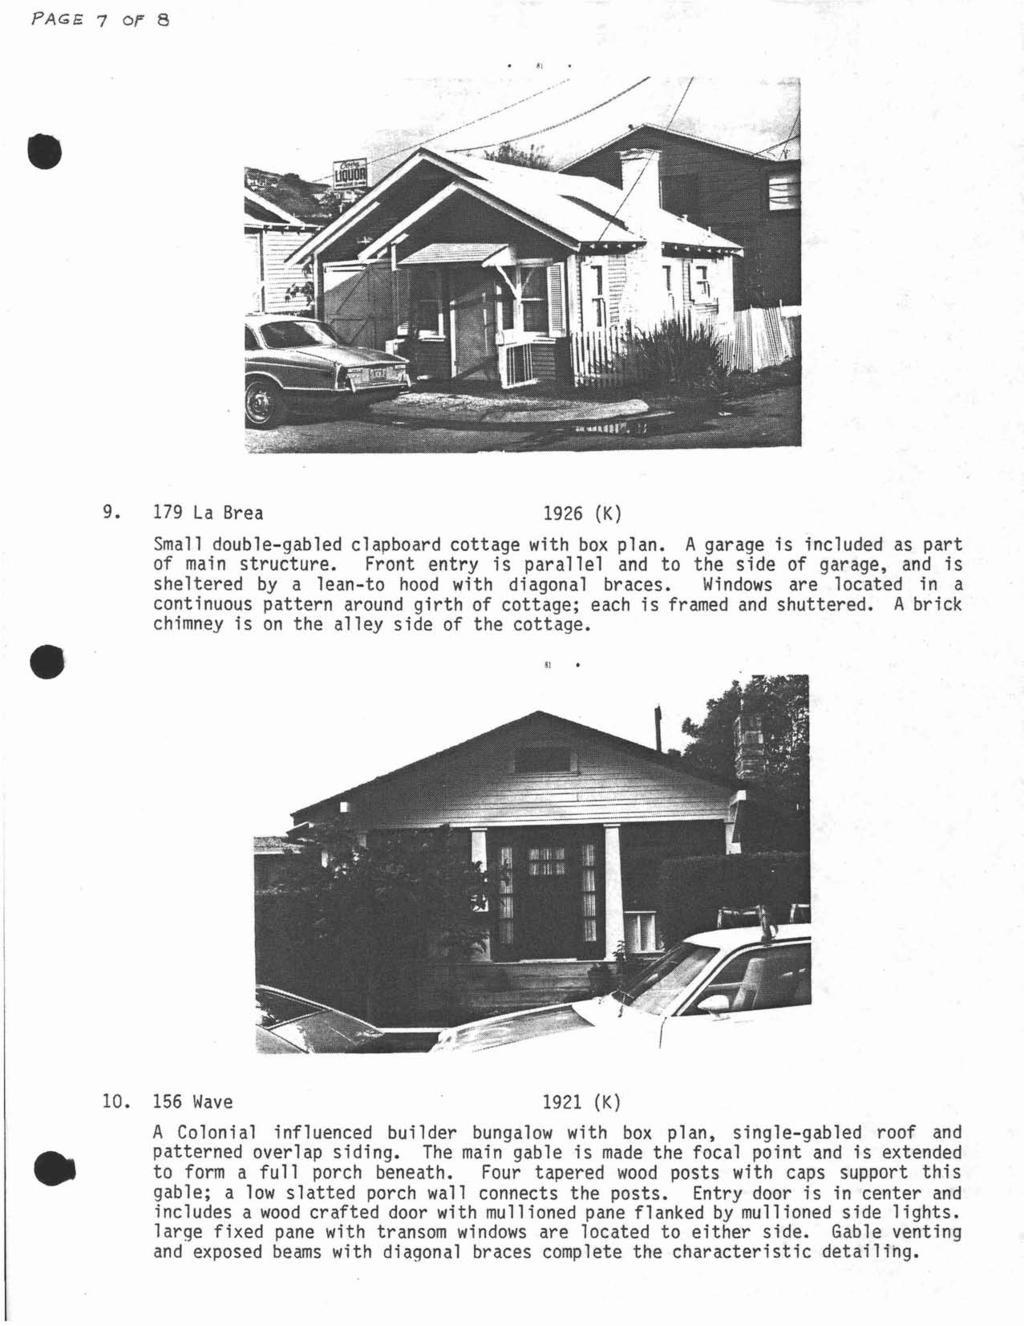 PAGE 7 OF 8 179 La Brea 1926 (K) Small double-gabled clapboard cottage with box plan. A garage is included as part of main structure.